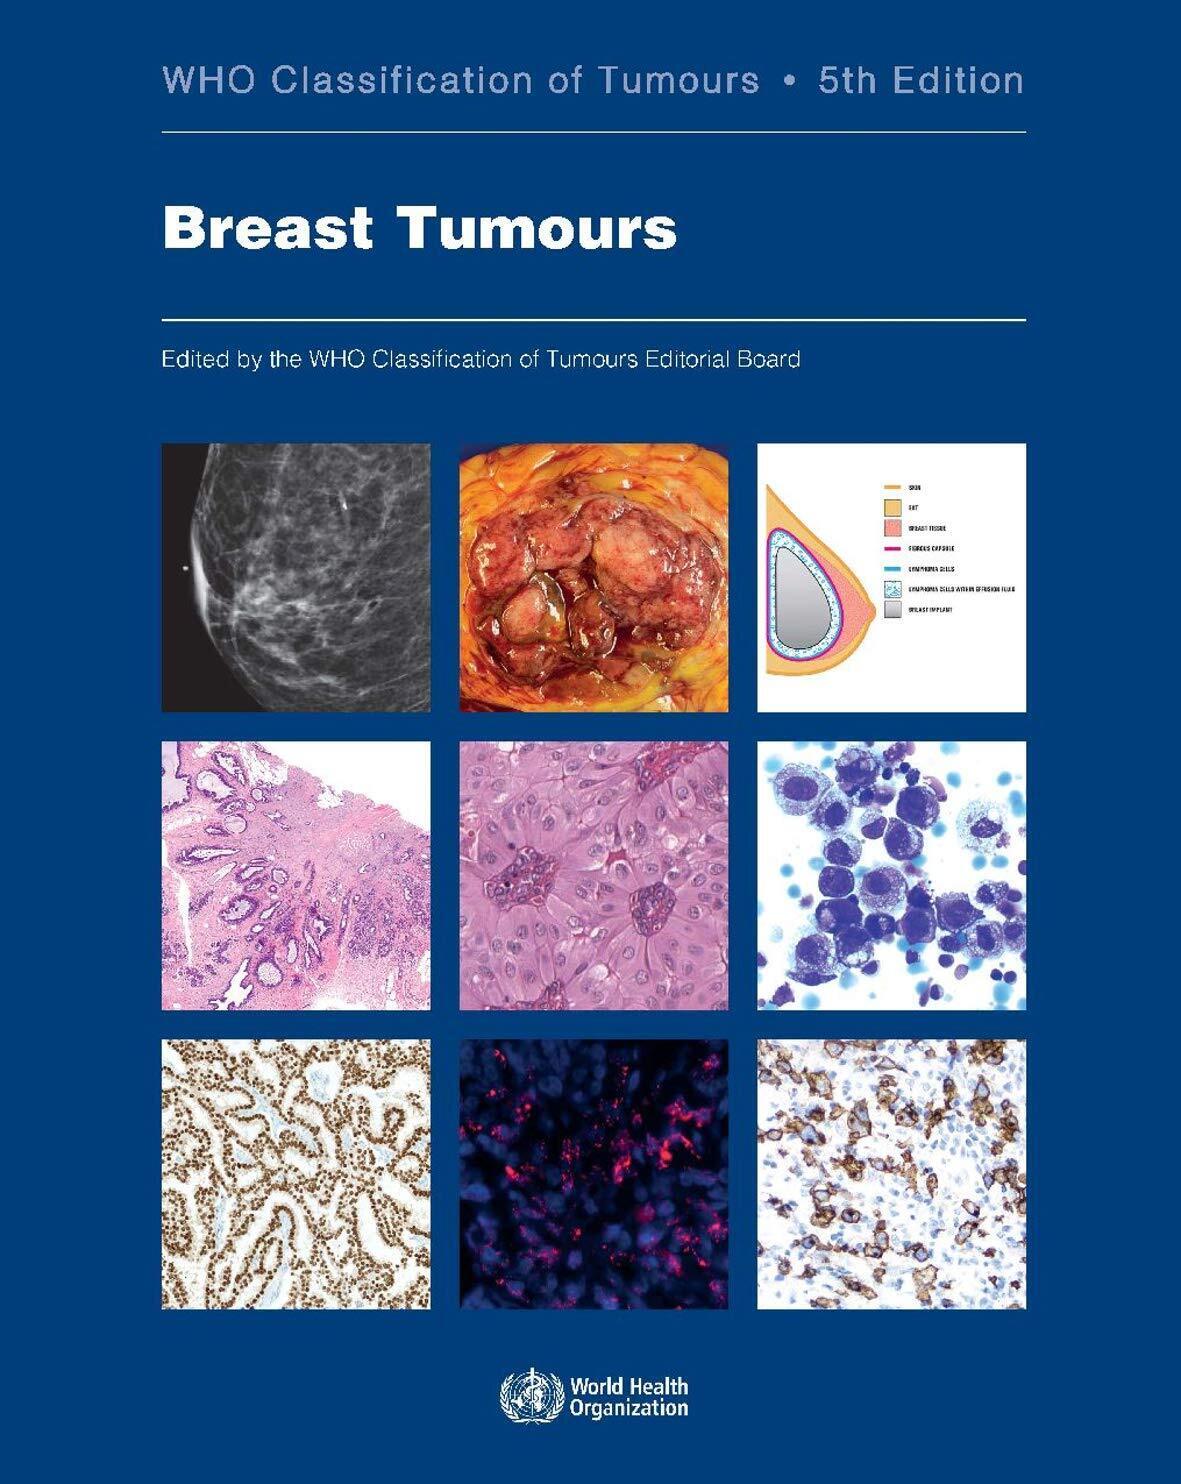 Breast Tumours - Who Classification of Tumours Editorial Board - 2019